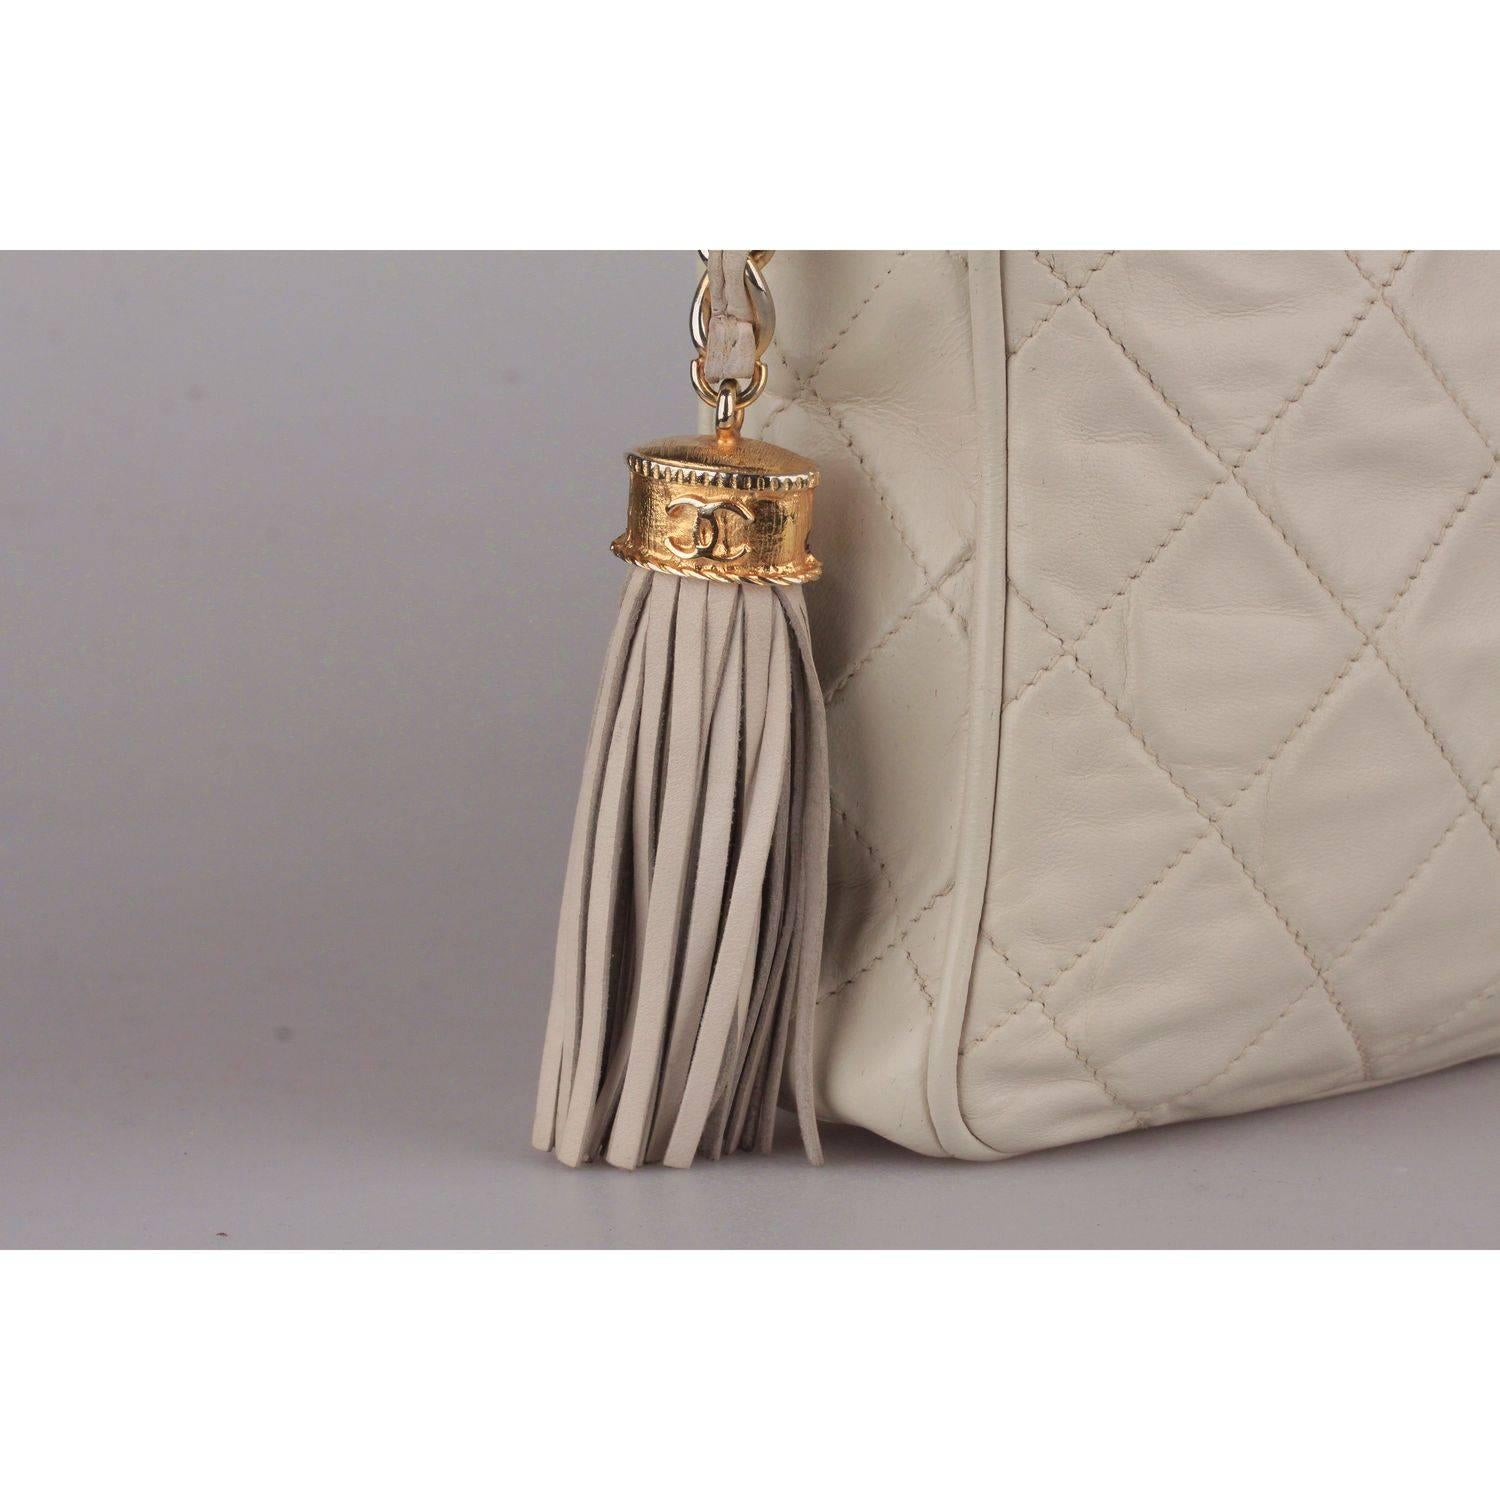 - Vintage Chanel Classic Camera bag with CC - CHANEL logo front stitching 
- Period/Era: 1986 to 1988
- Ivory quilted lambskin leather 
-  Upper zip closure
- Chanel chain 
- Tassel zipper pull 
- Lined in leather 
-  'CHANEL' embossed inside, 'Made